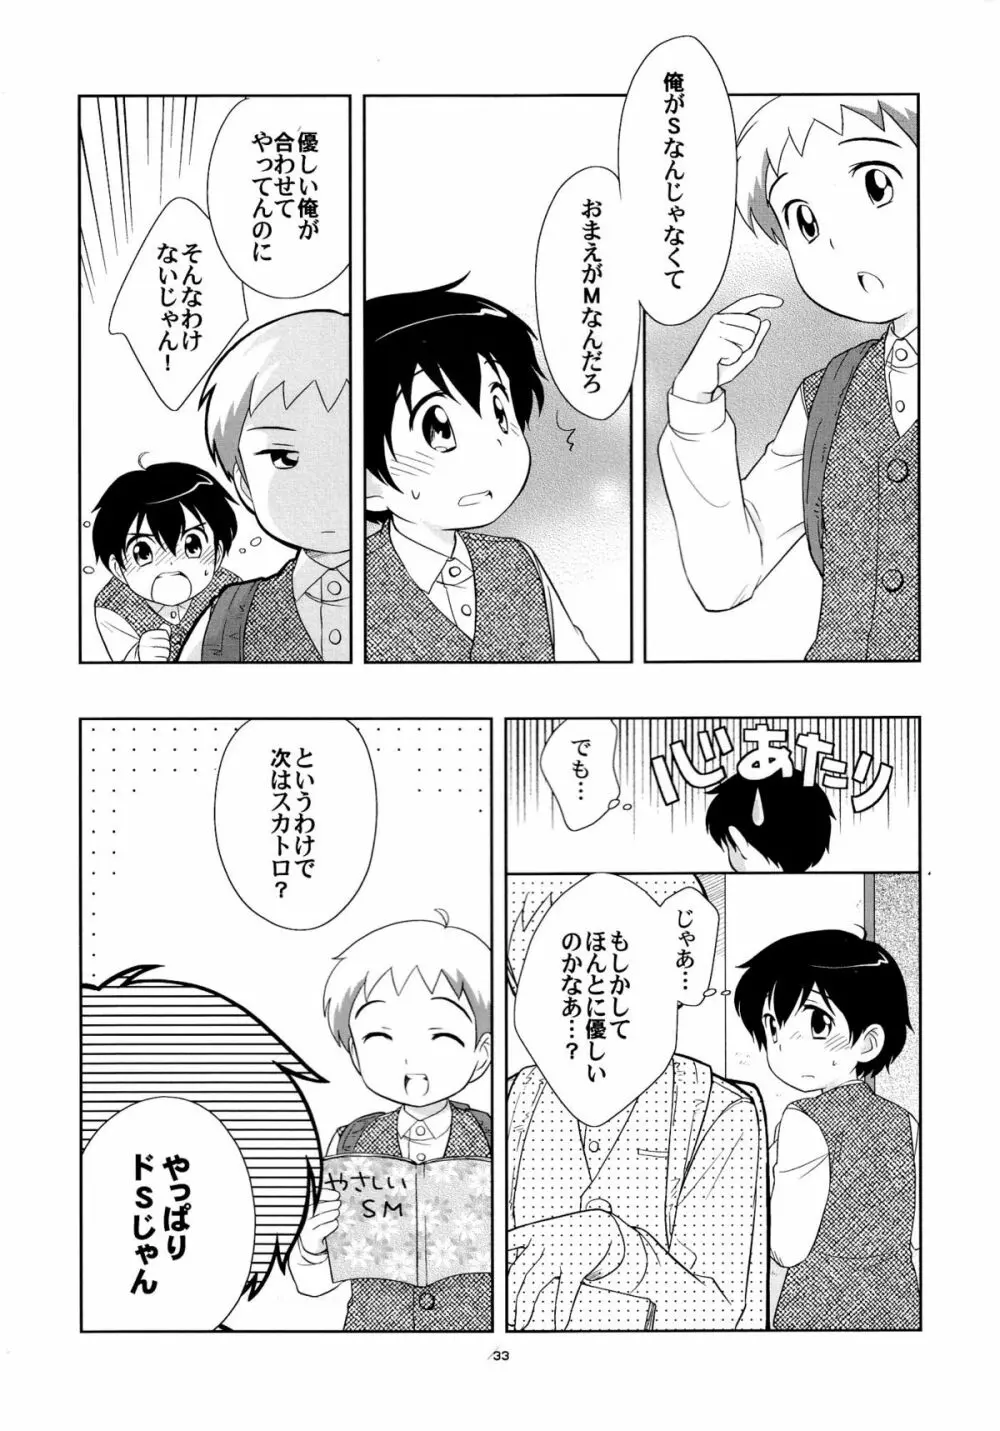 the Slave driver at school Again 2年目もあそぼ! Page.32